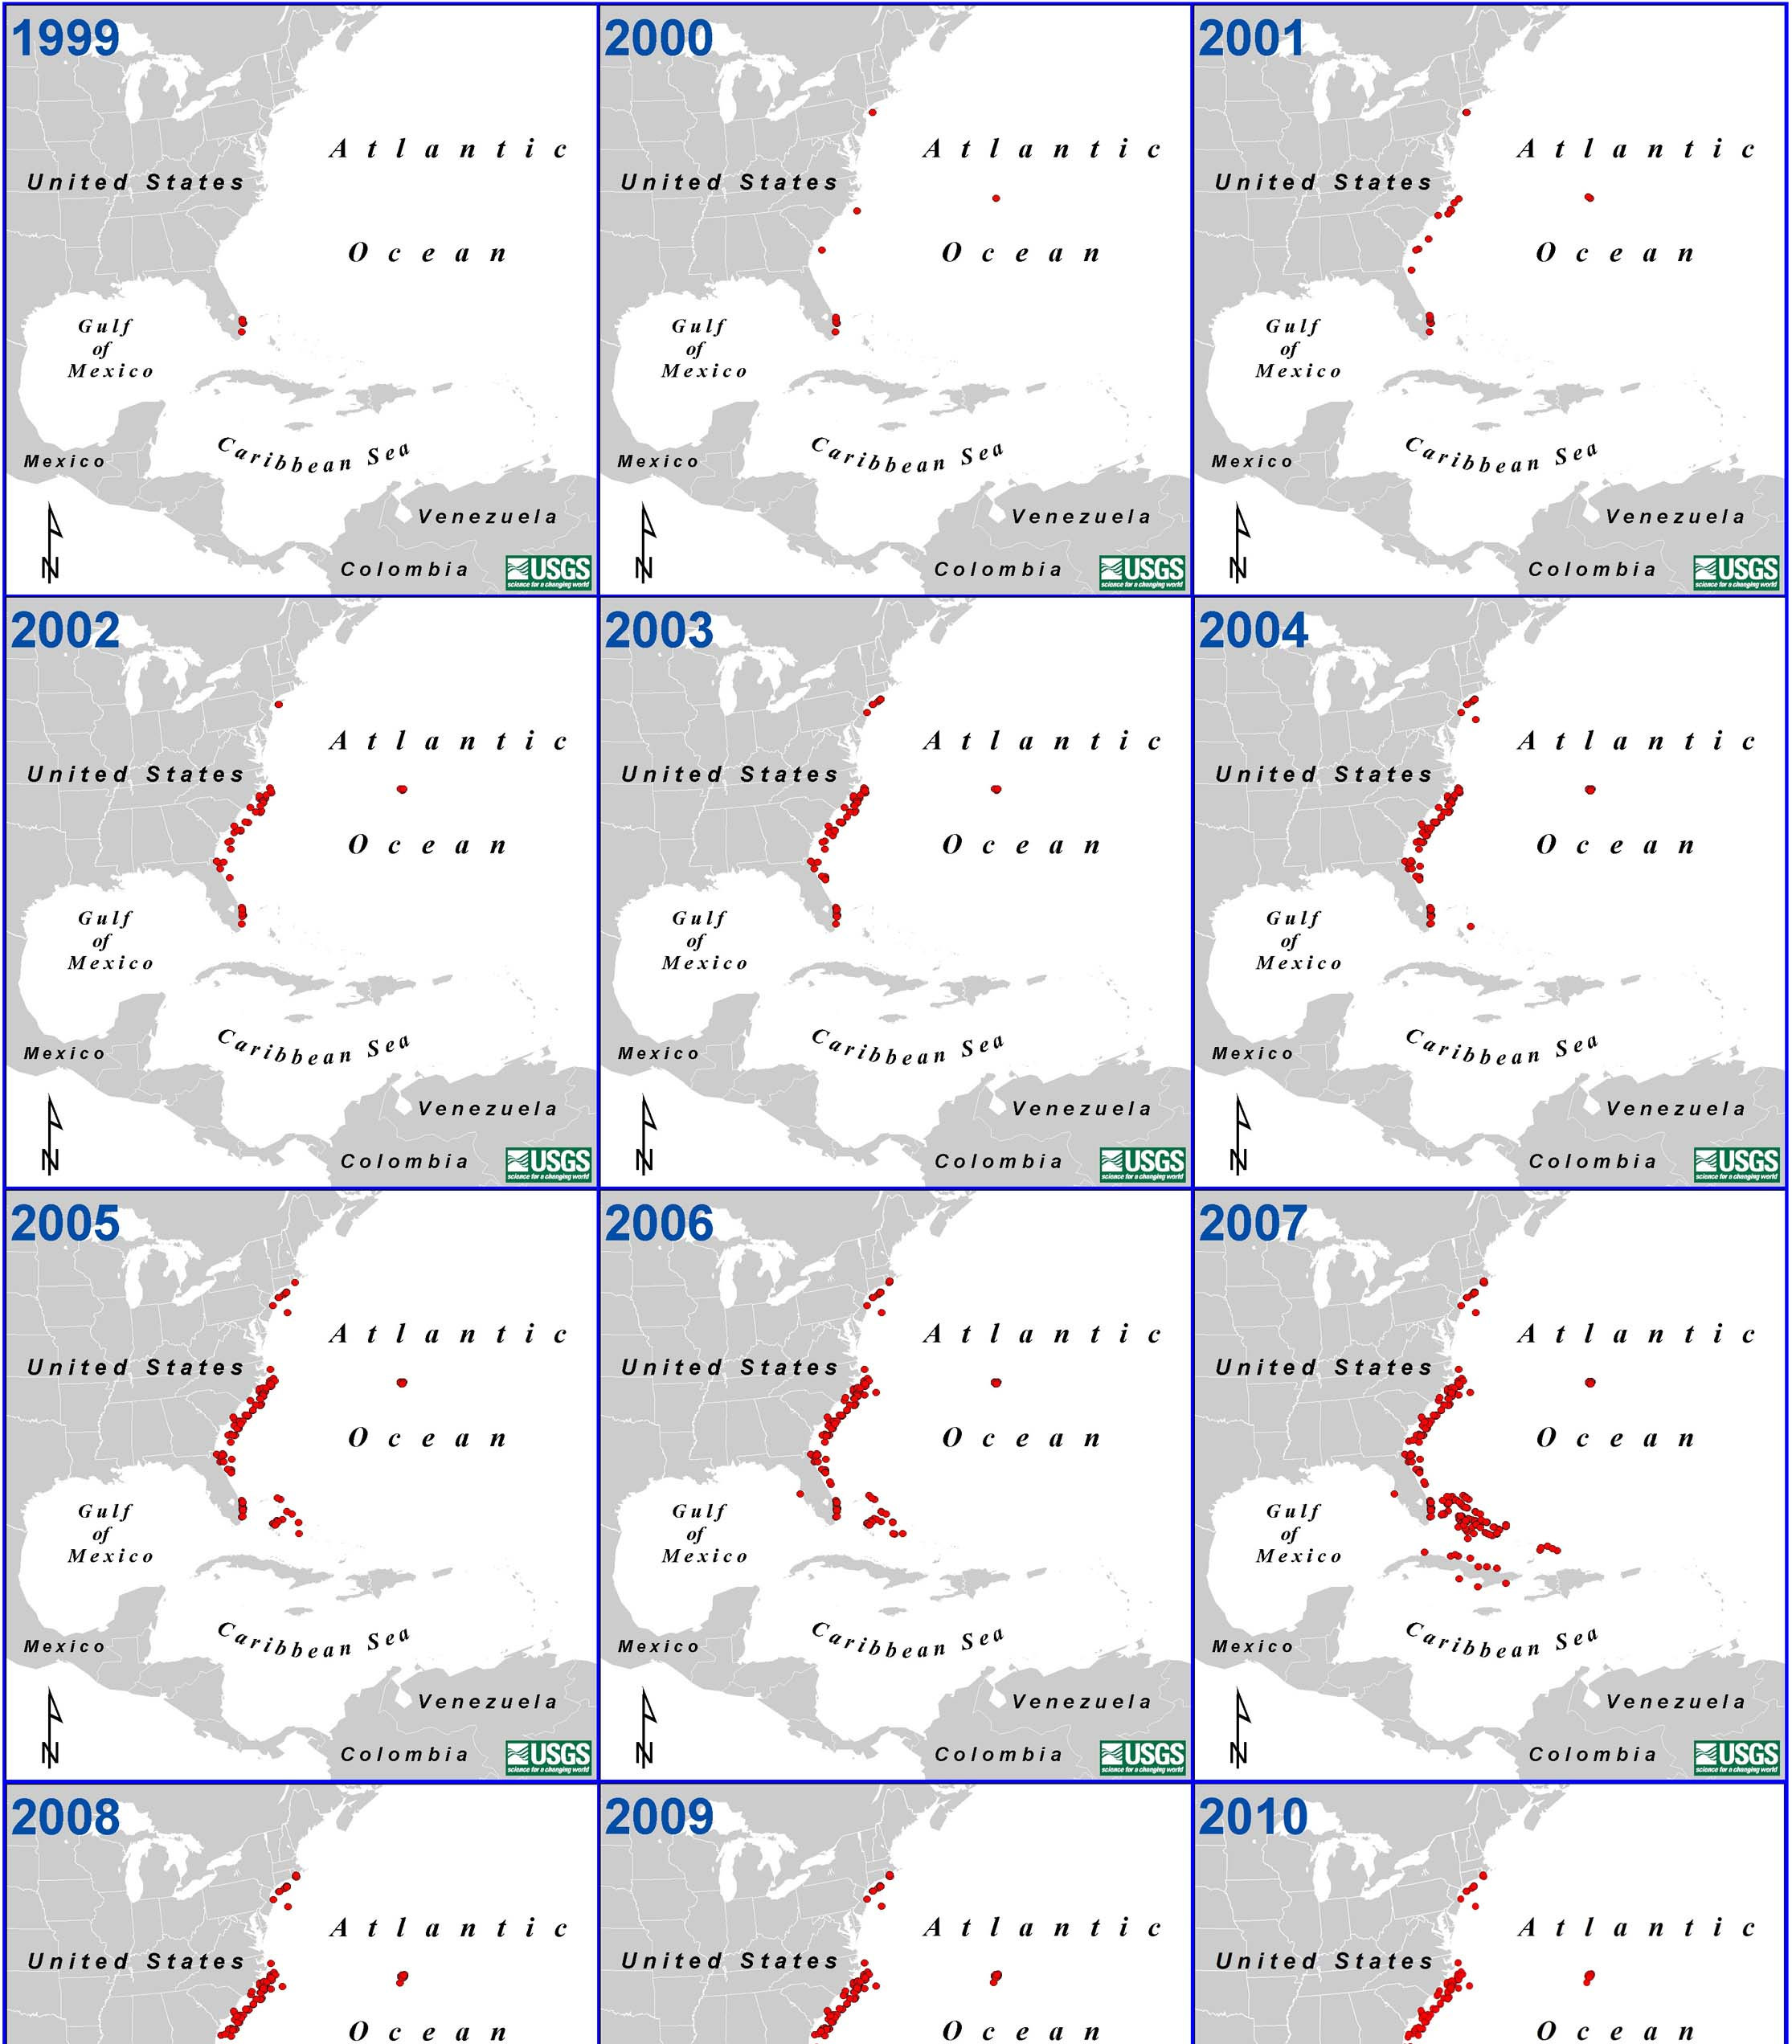 P. J. Schofield Figure 2. Confirmed lionfish occurrences in the Western North Atlantic and Caribbean Sea (USGS-NAS 2010).